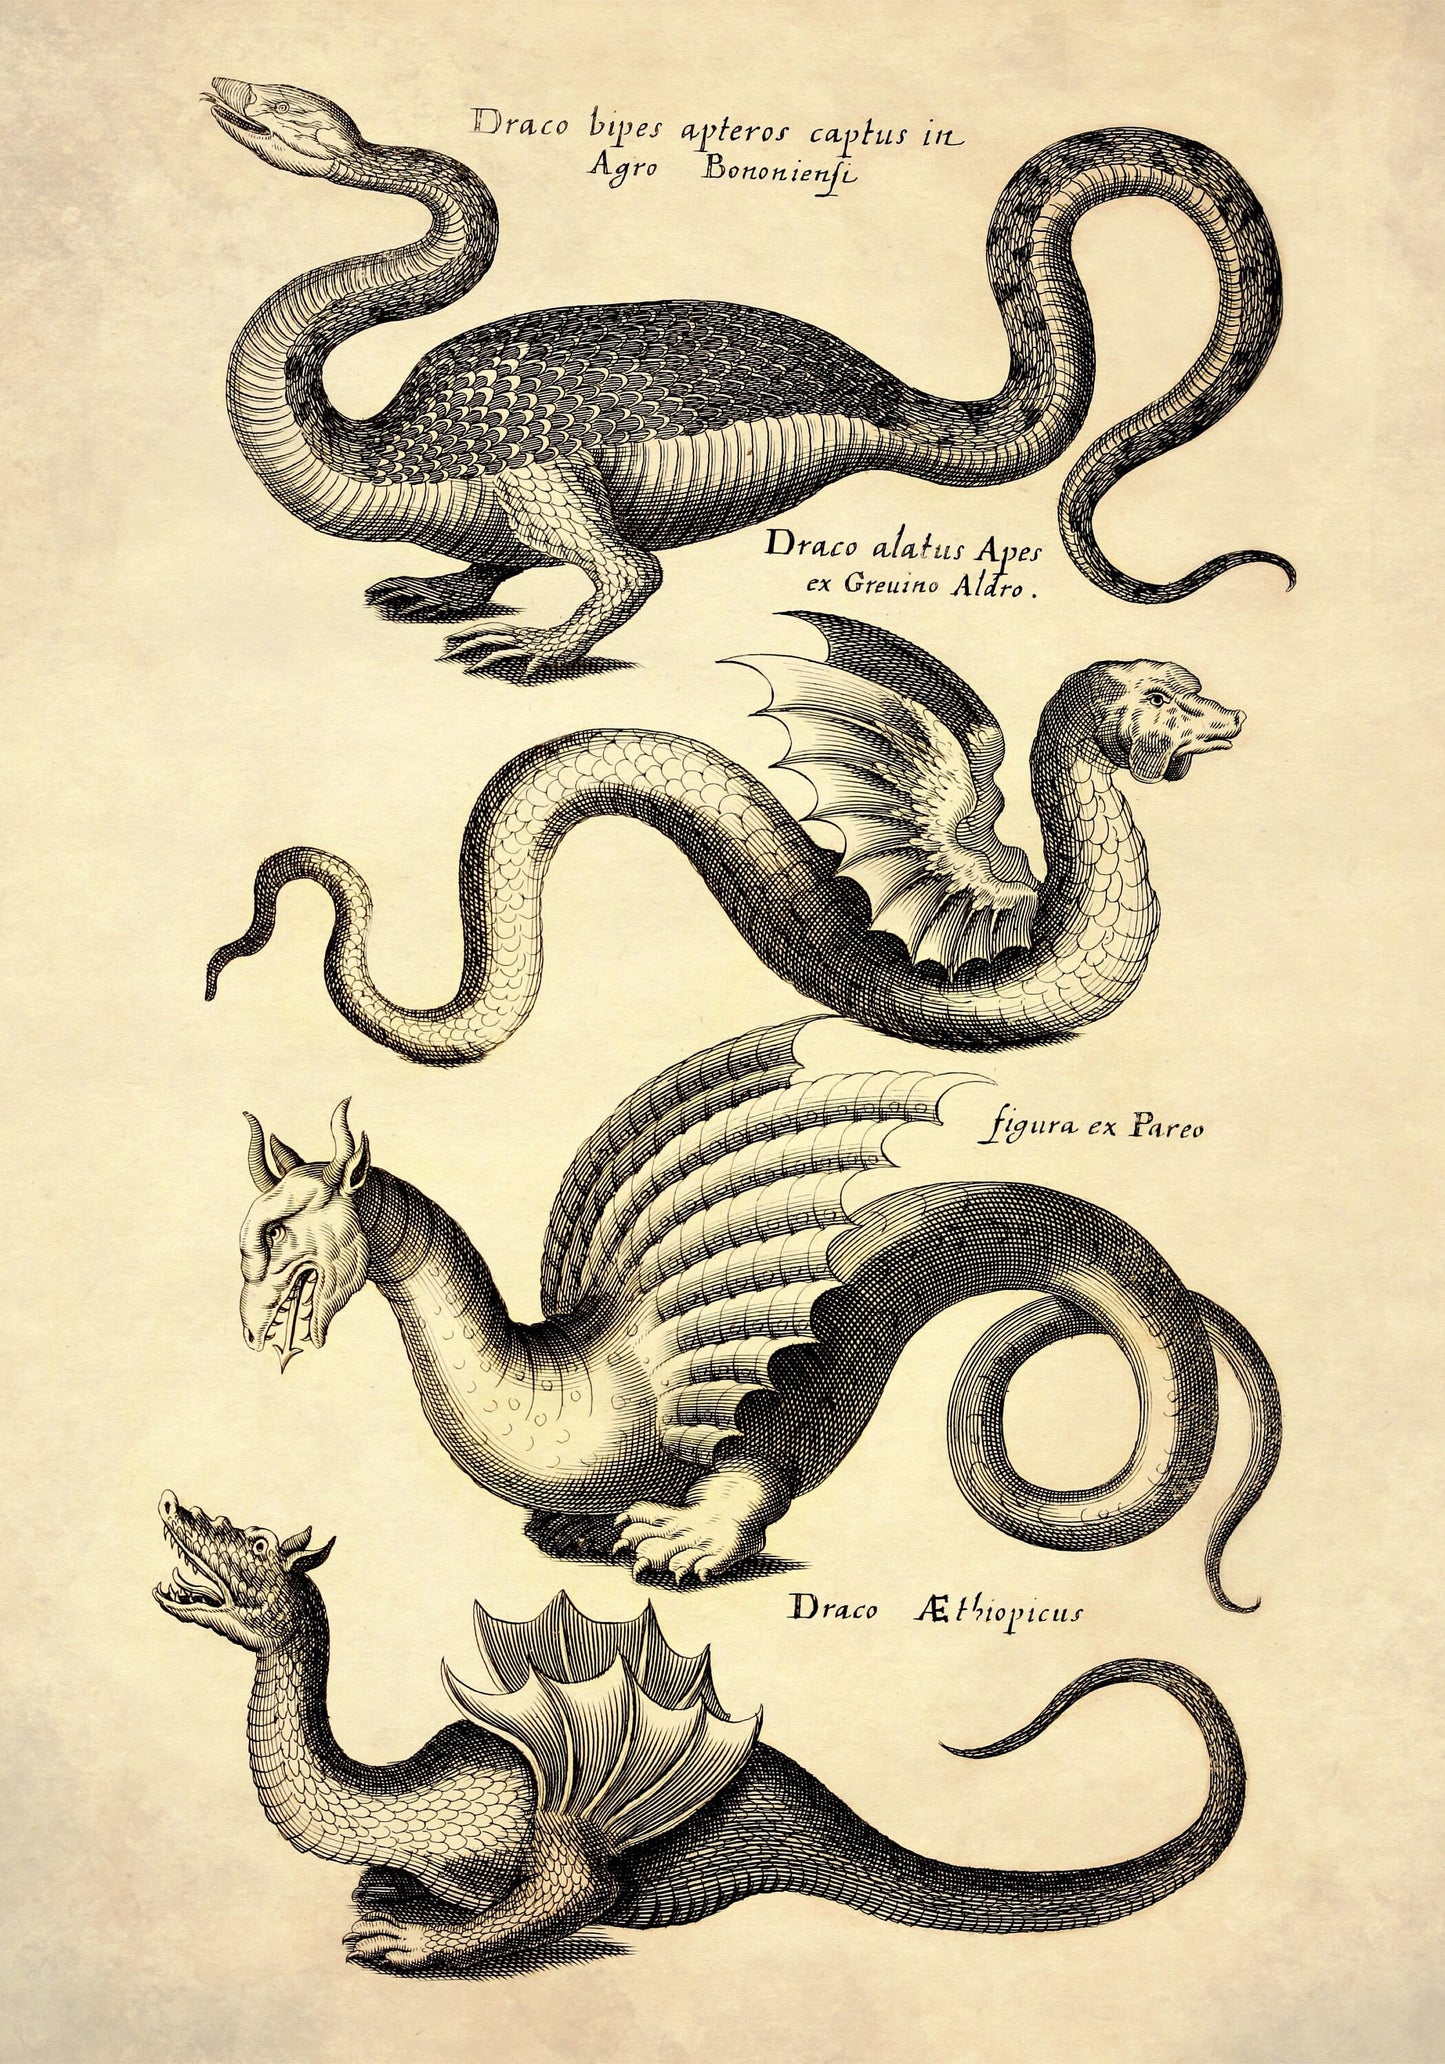 Dragons Print dated 1650 - Antique Reproduction - Mythological Creature - Vintage Art - Available Framed